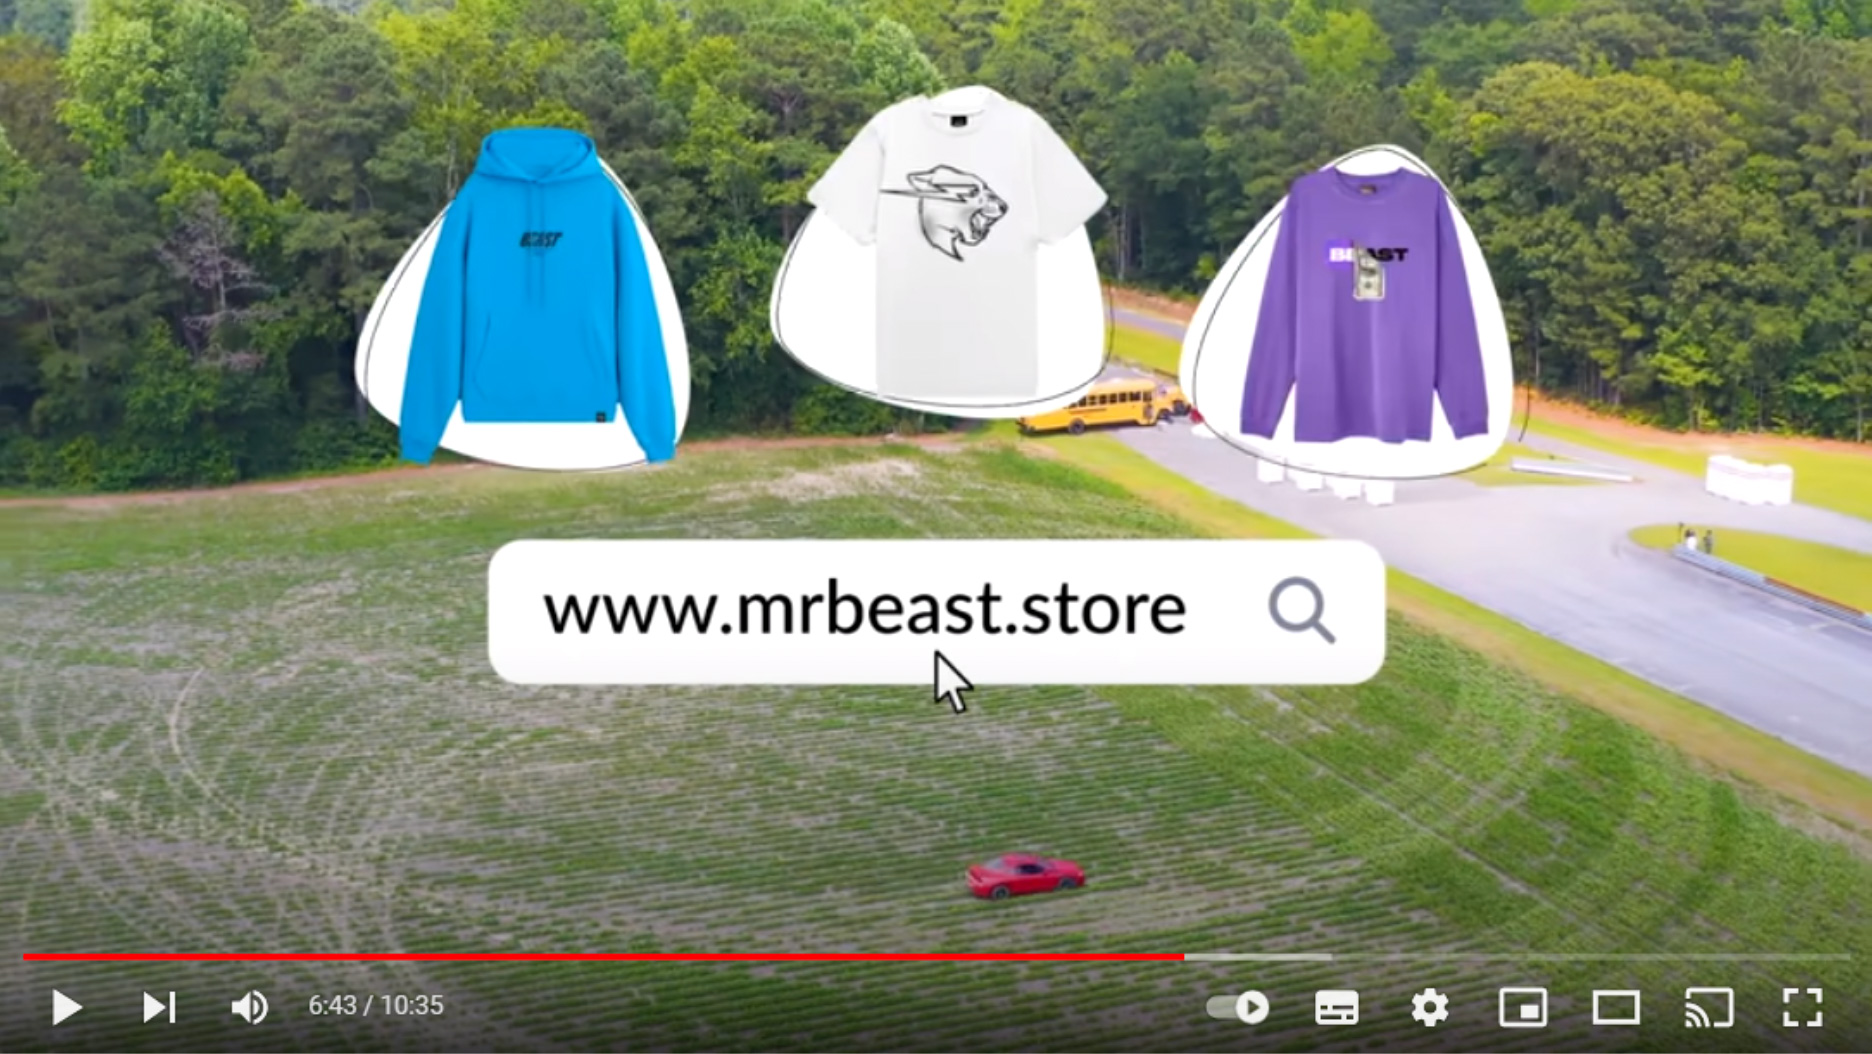 New  king MrBeast: amateur poster who became $54m-a-year pro